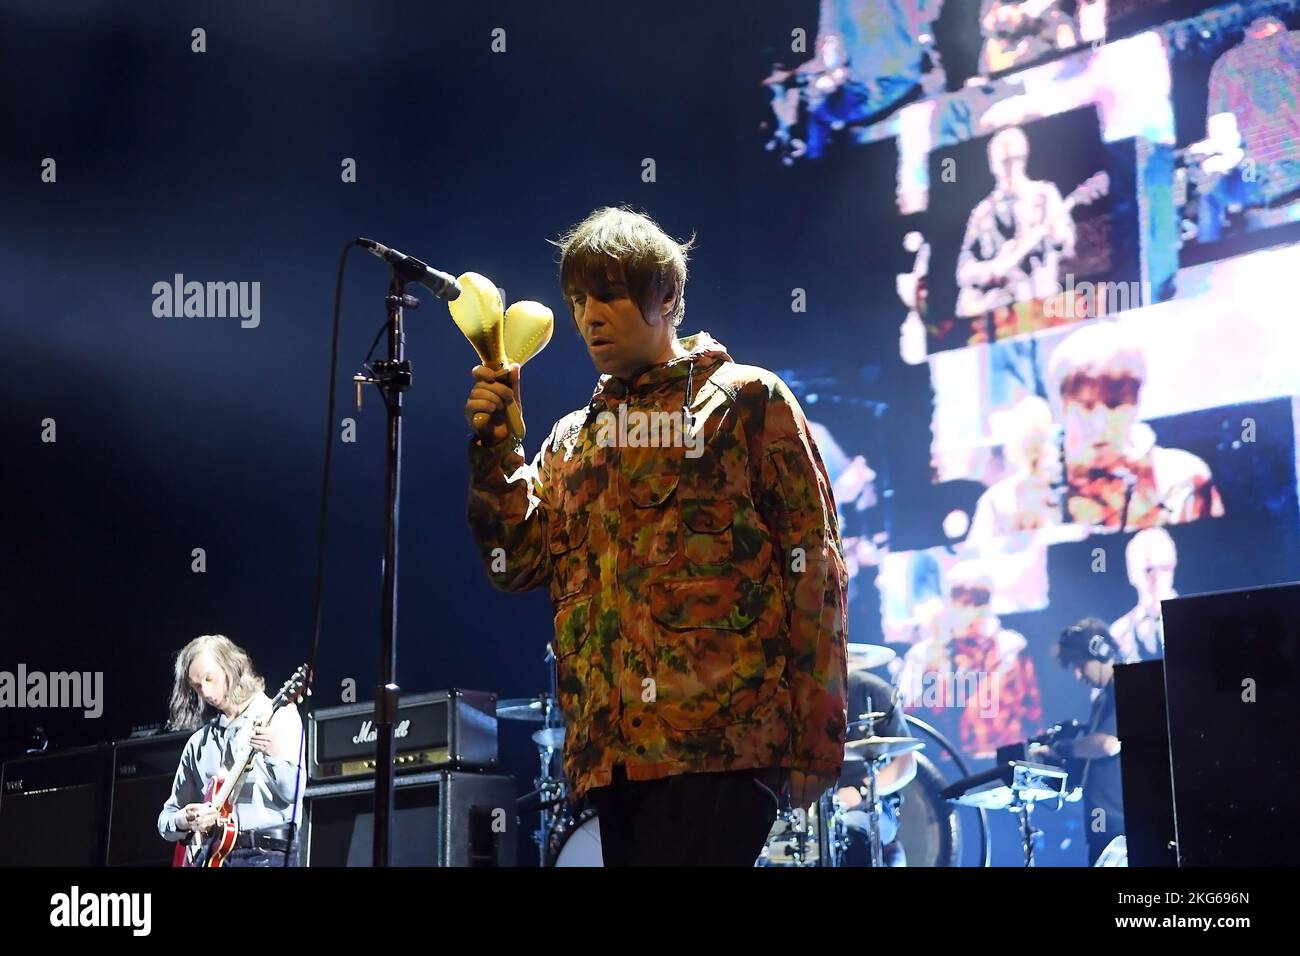 Rio de Janeiro,November 16, 2022.Singer Liam Gallagher former vocalist of the band Oasis, during a show at Qualistage in the city of Rio de Janeiro Stock Photo